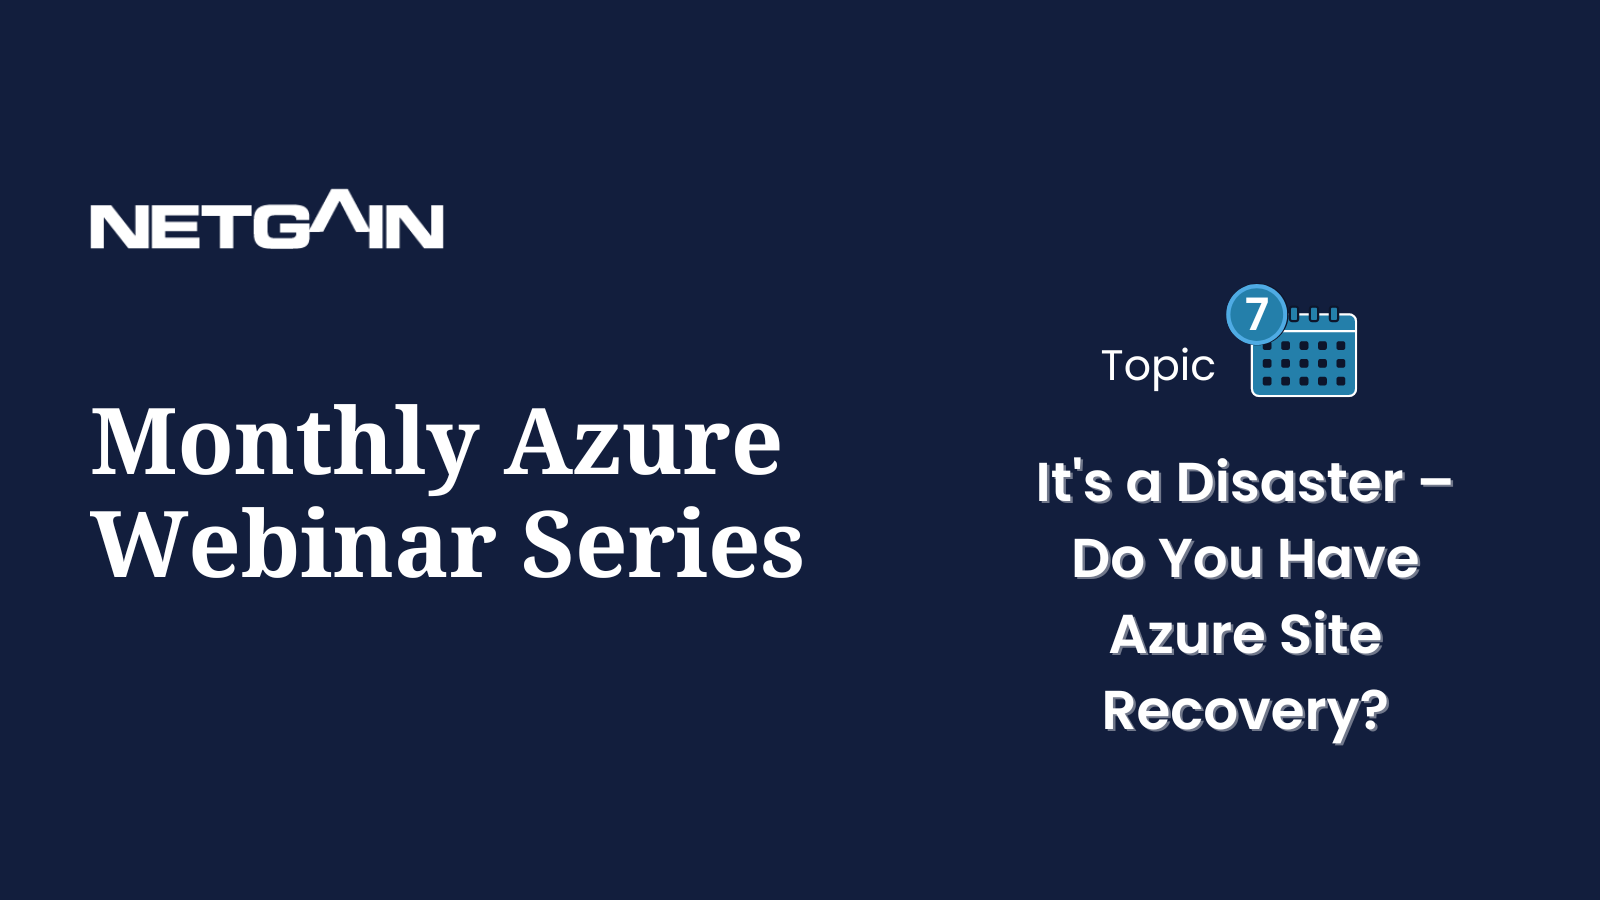 It’s a Disaster – Do You Have Azure Site Recovery?